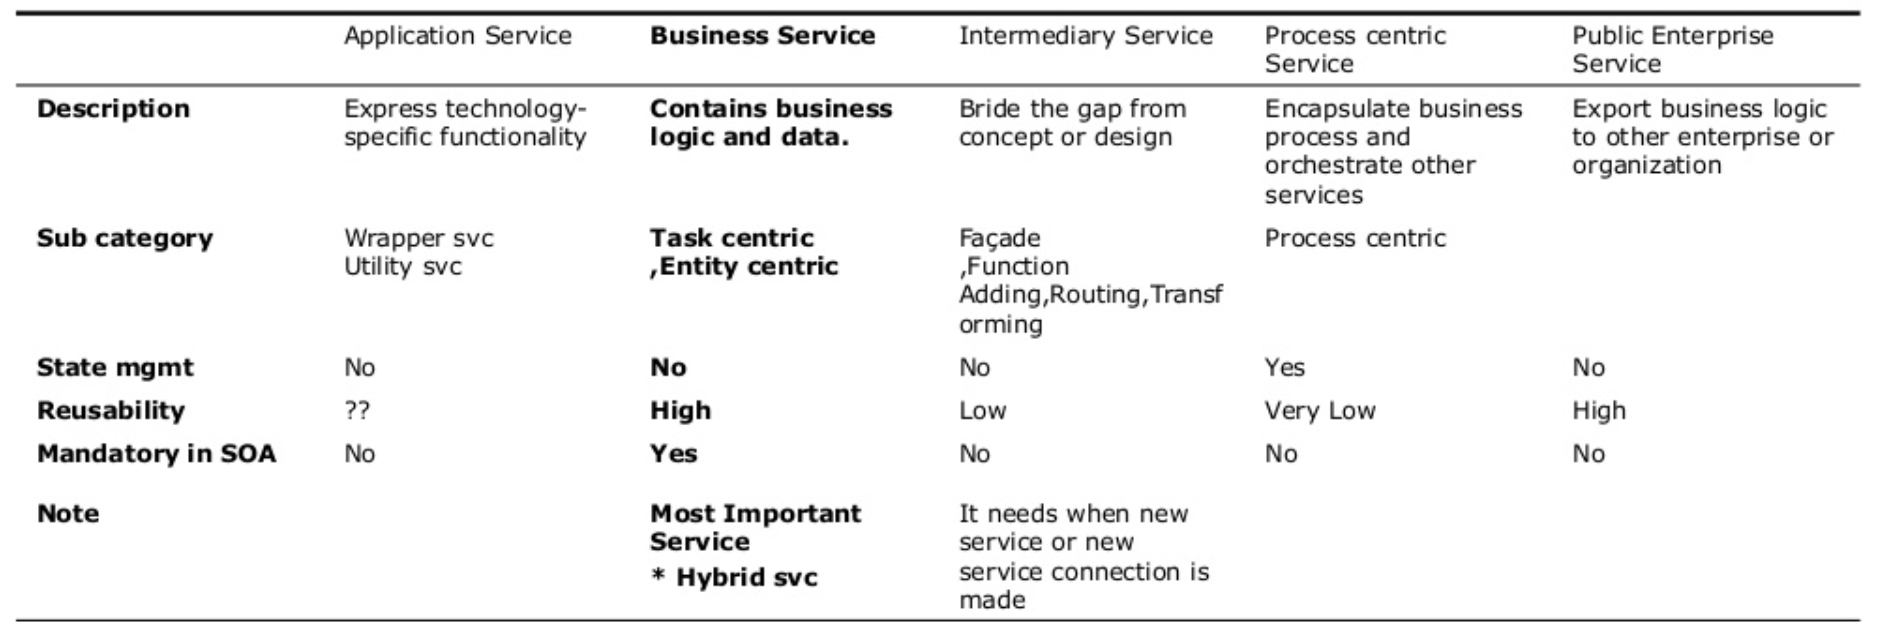 Classification of Service